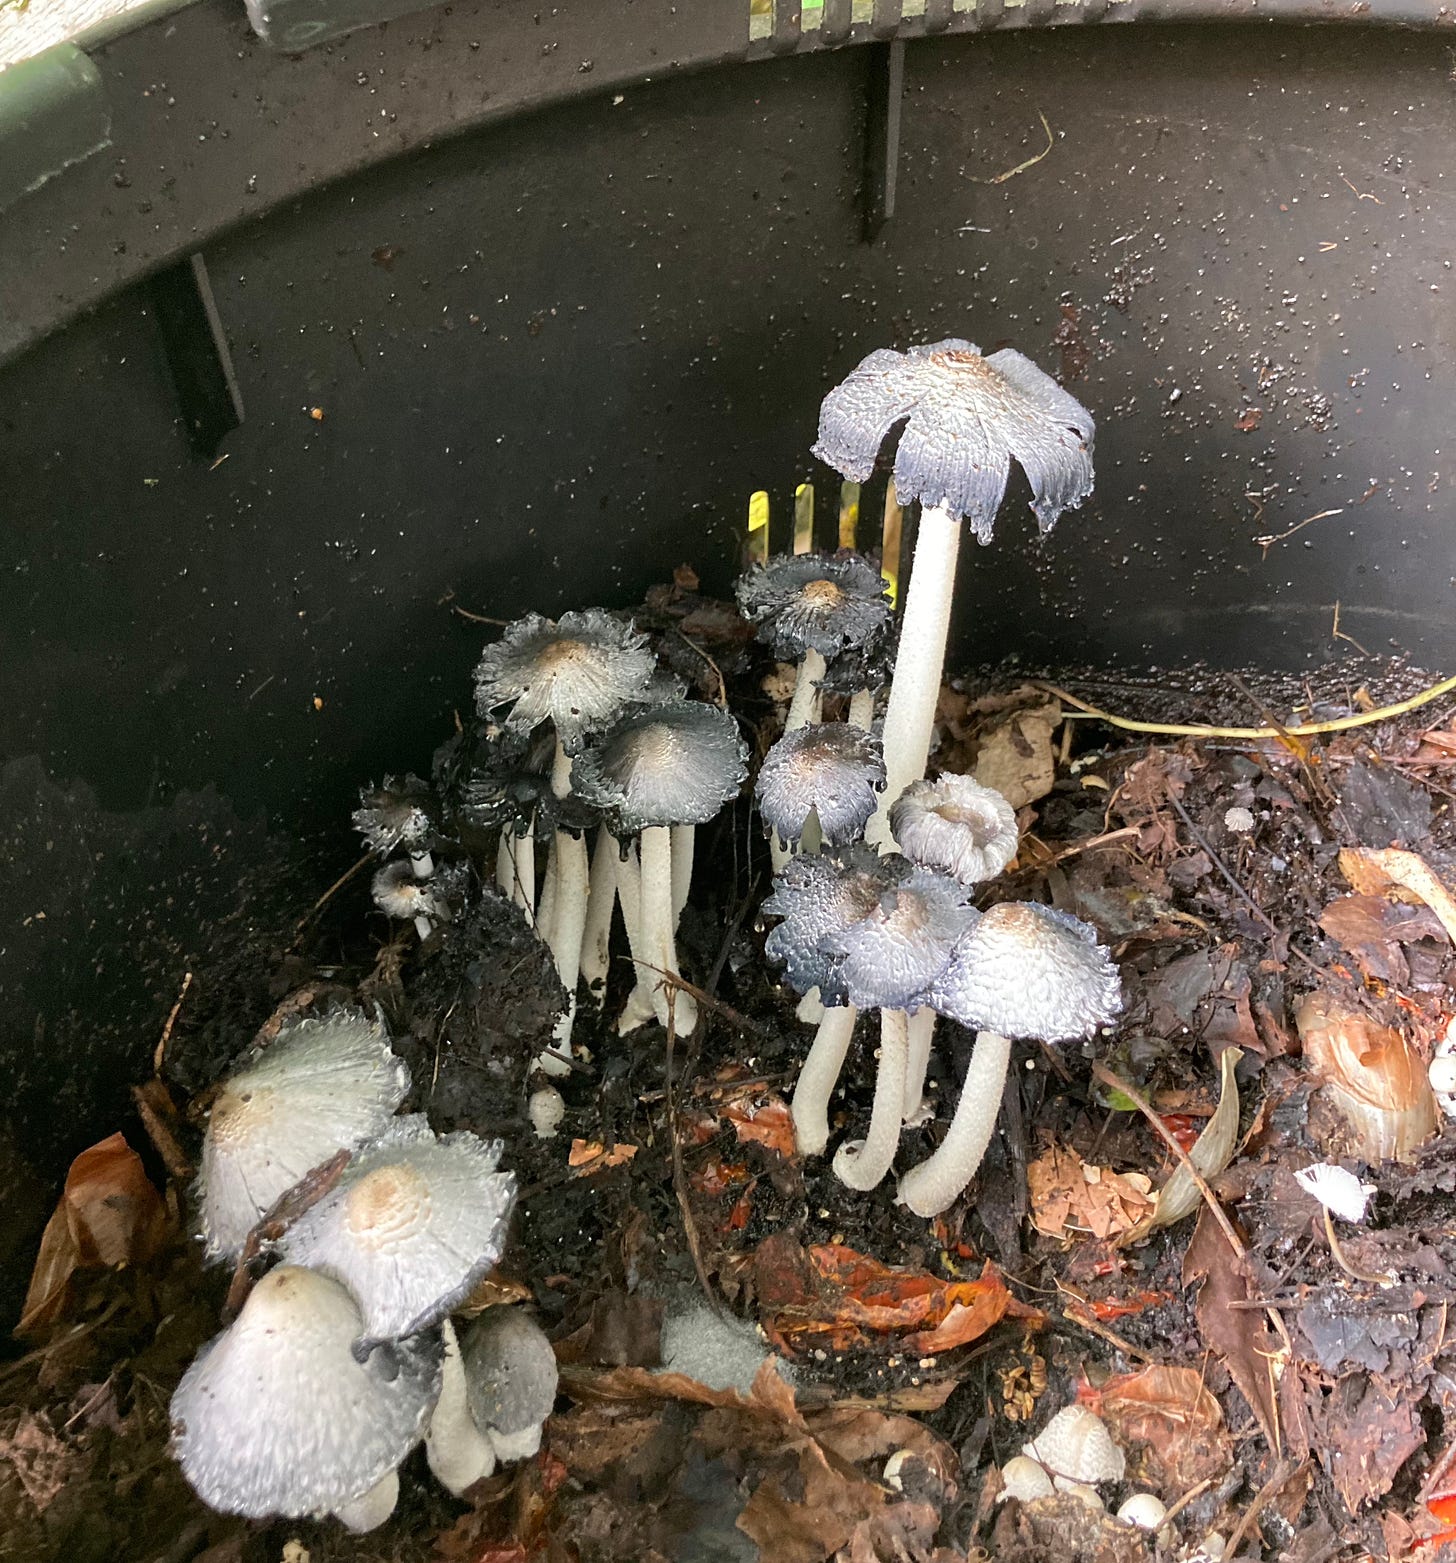 Inside a round black recycling bin, silvery-grey mushrooms have appeared amidst the brown compost pile